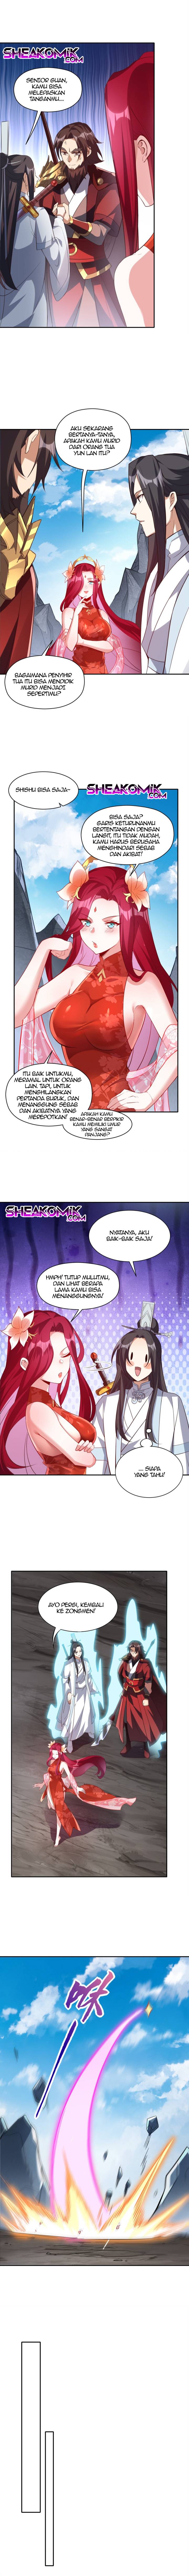 Fairy, You Have A Bad Omen! Chapter 07 - 91